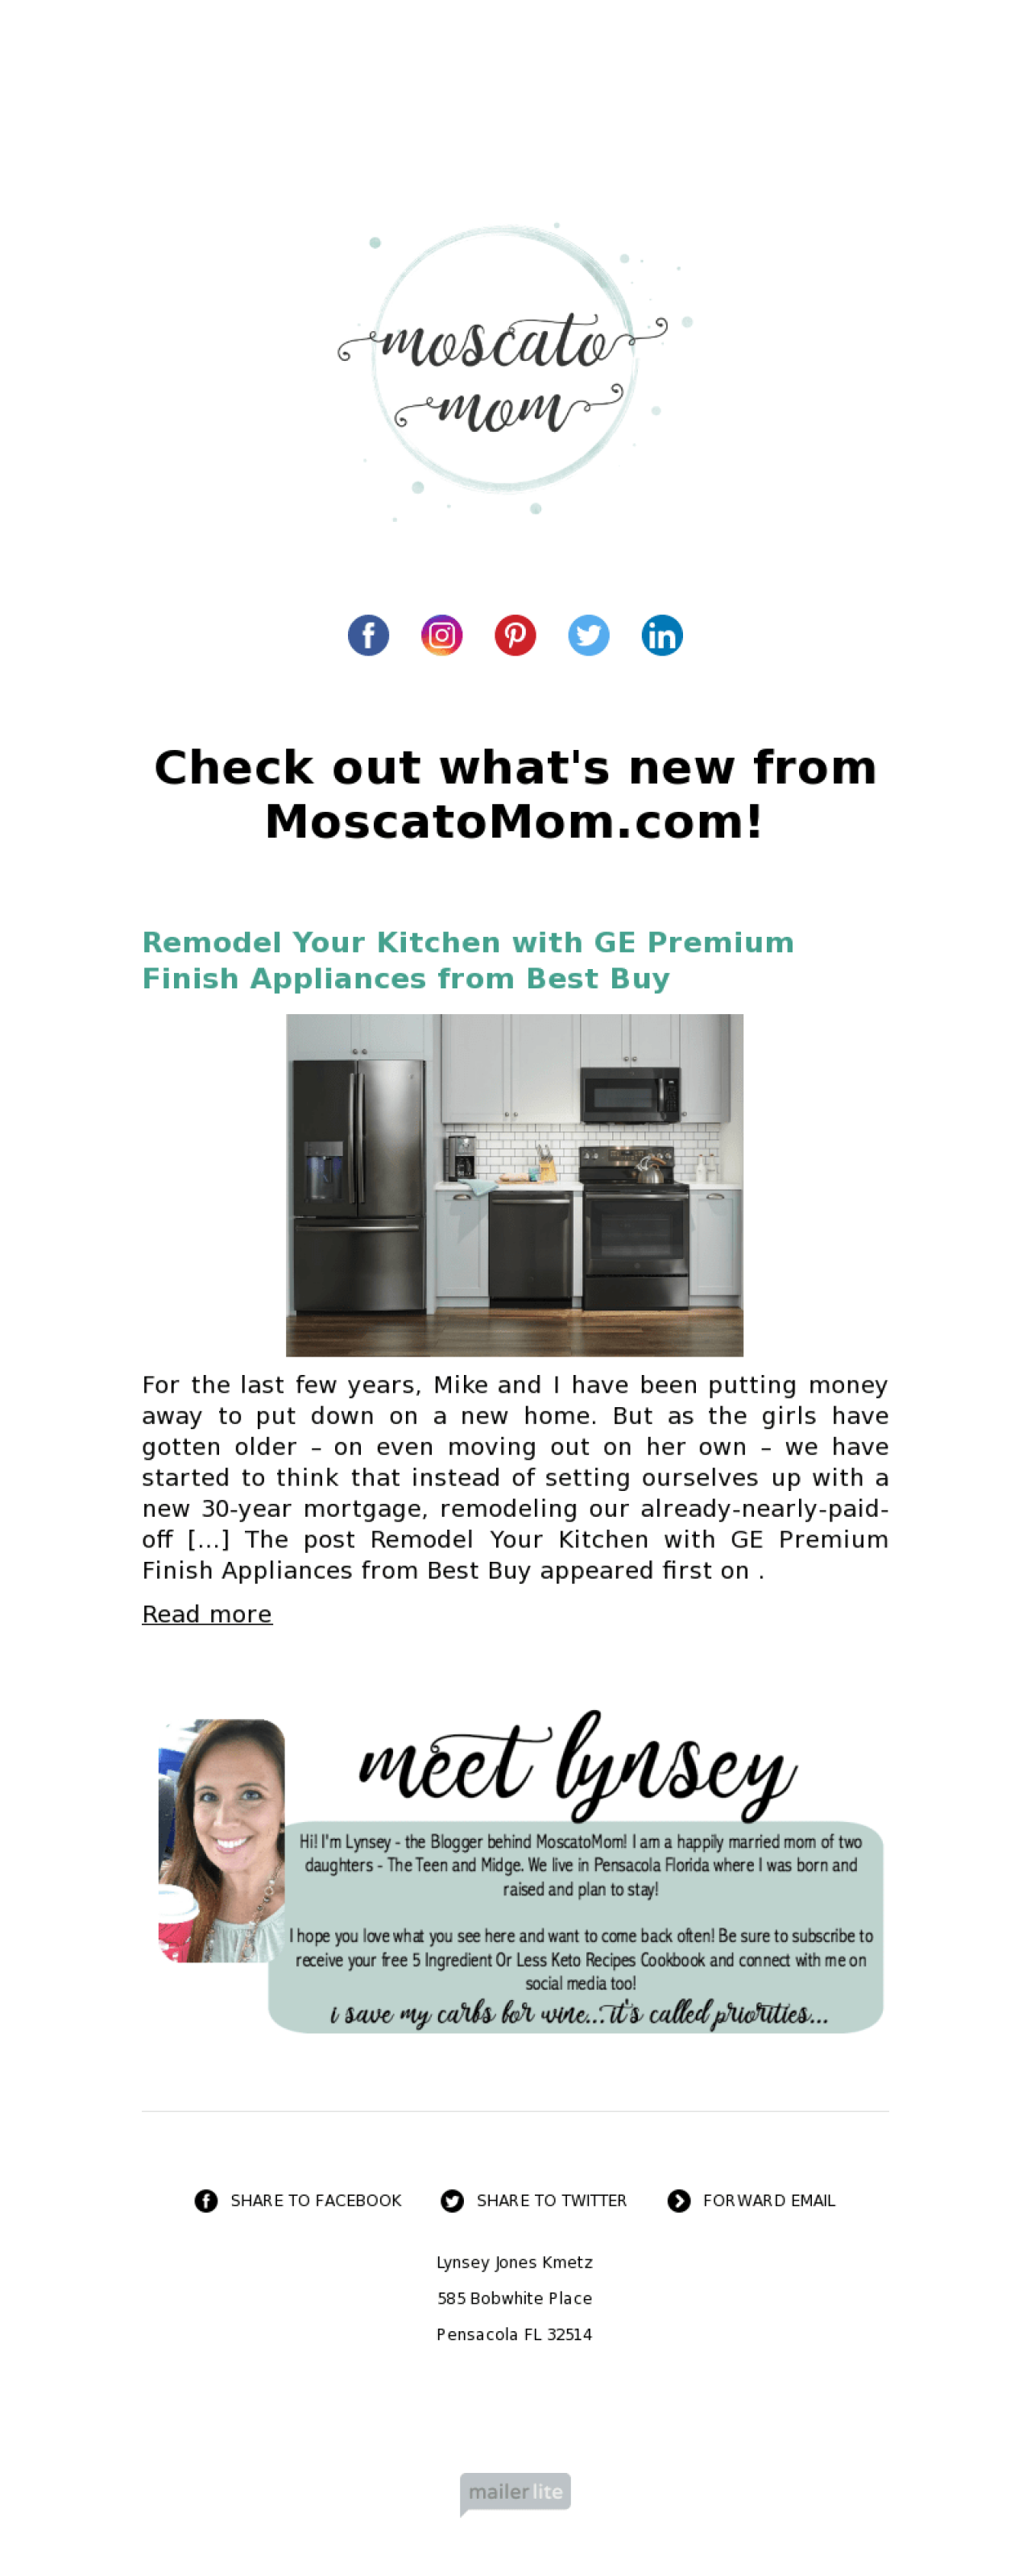 Moscato Mom example - Made with MailerLite